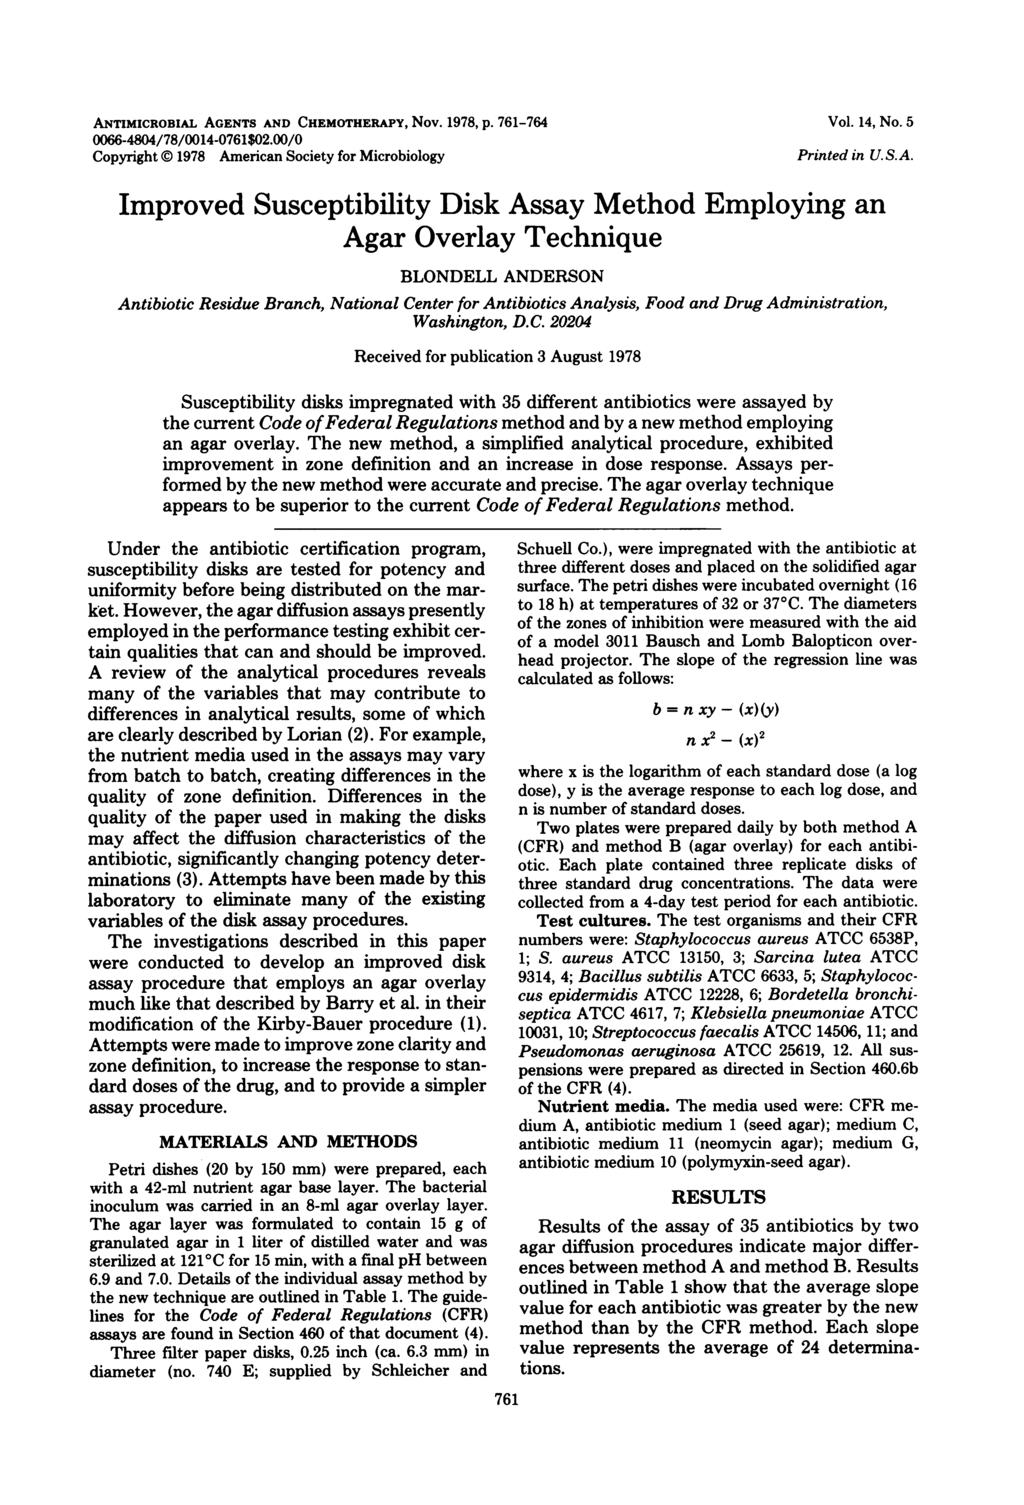 ANTIMICROIAL AGENTS AND CHEMOTHERAPY, Nov. 1978, P. 761-764 66-484/78/14-761$2./ pyright 1978 American Society for Microbiology Vol. 14, No. 5 Printed in U.S.A. Improved Susceptibility Disk Assay